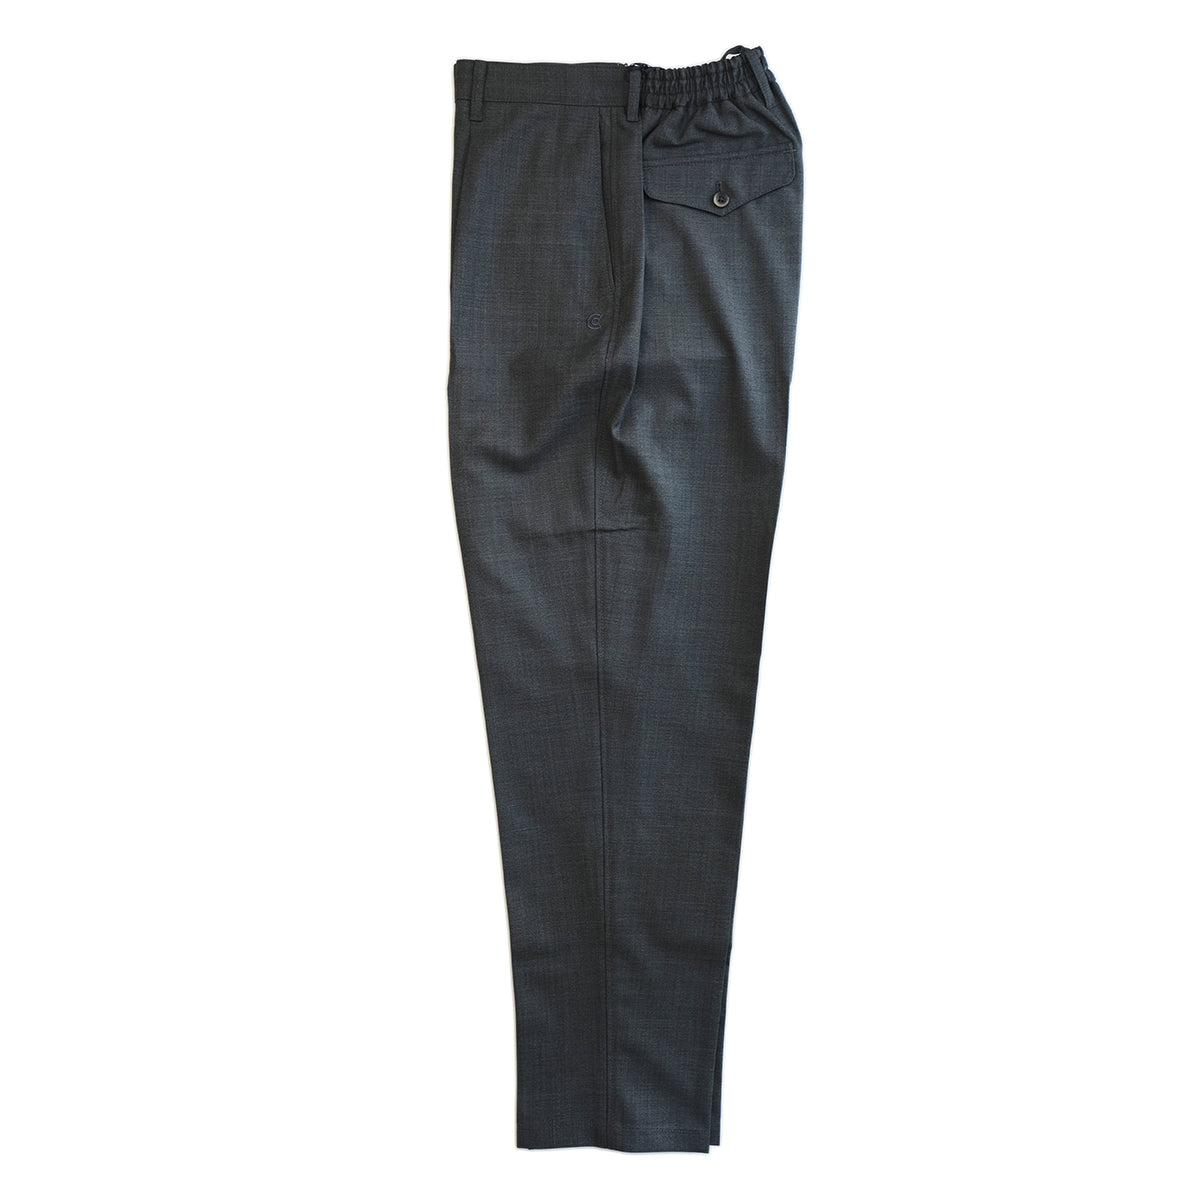 COLONY CLOTHING / ONE PLEAT TROUSERS SHARK SKIN / CC21-PT01-1